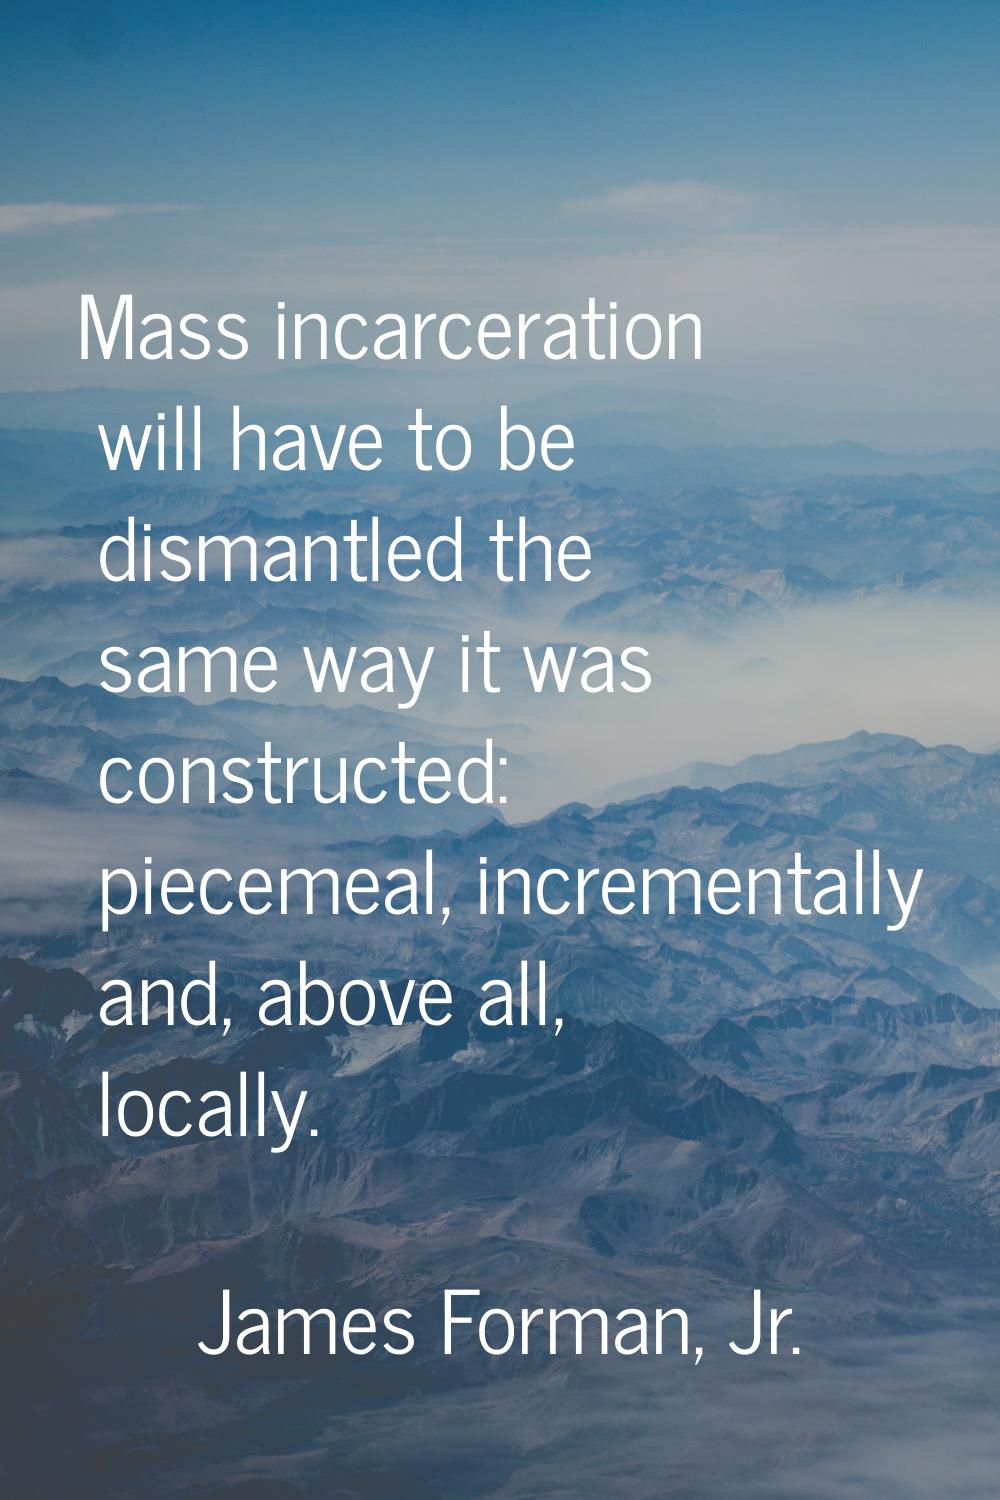 Mass incarceration will have to be dismantled the same way it was constructed: piecemeal, increment